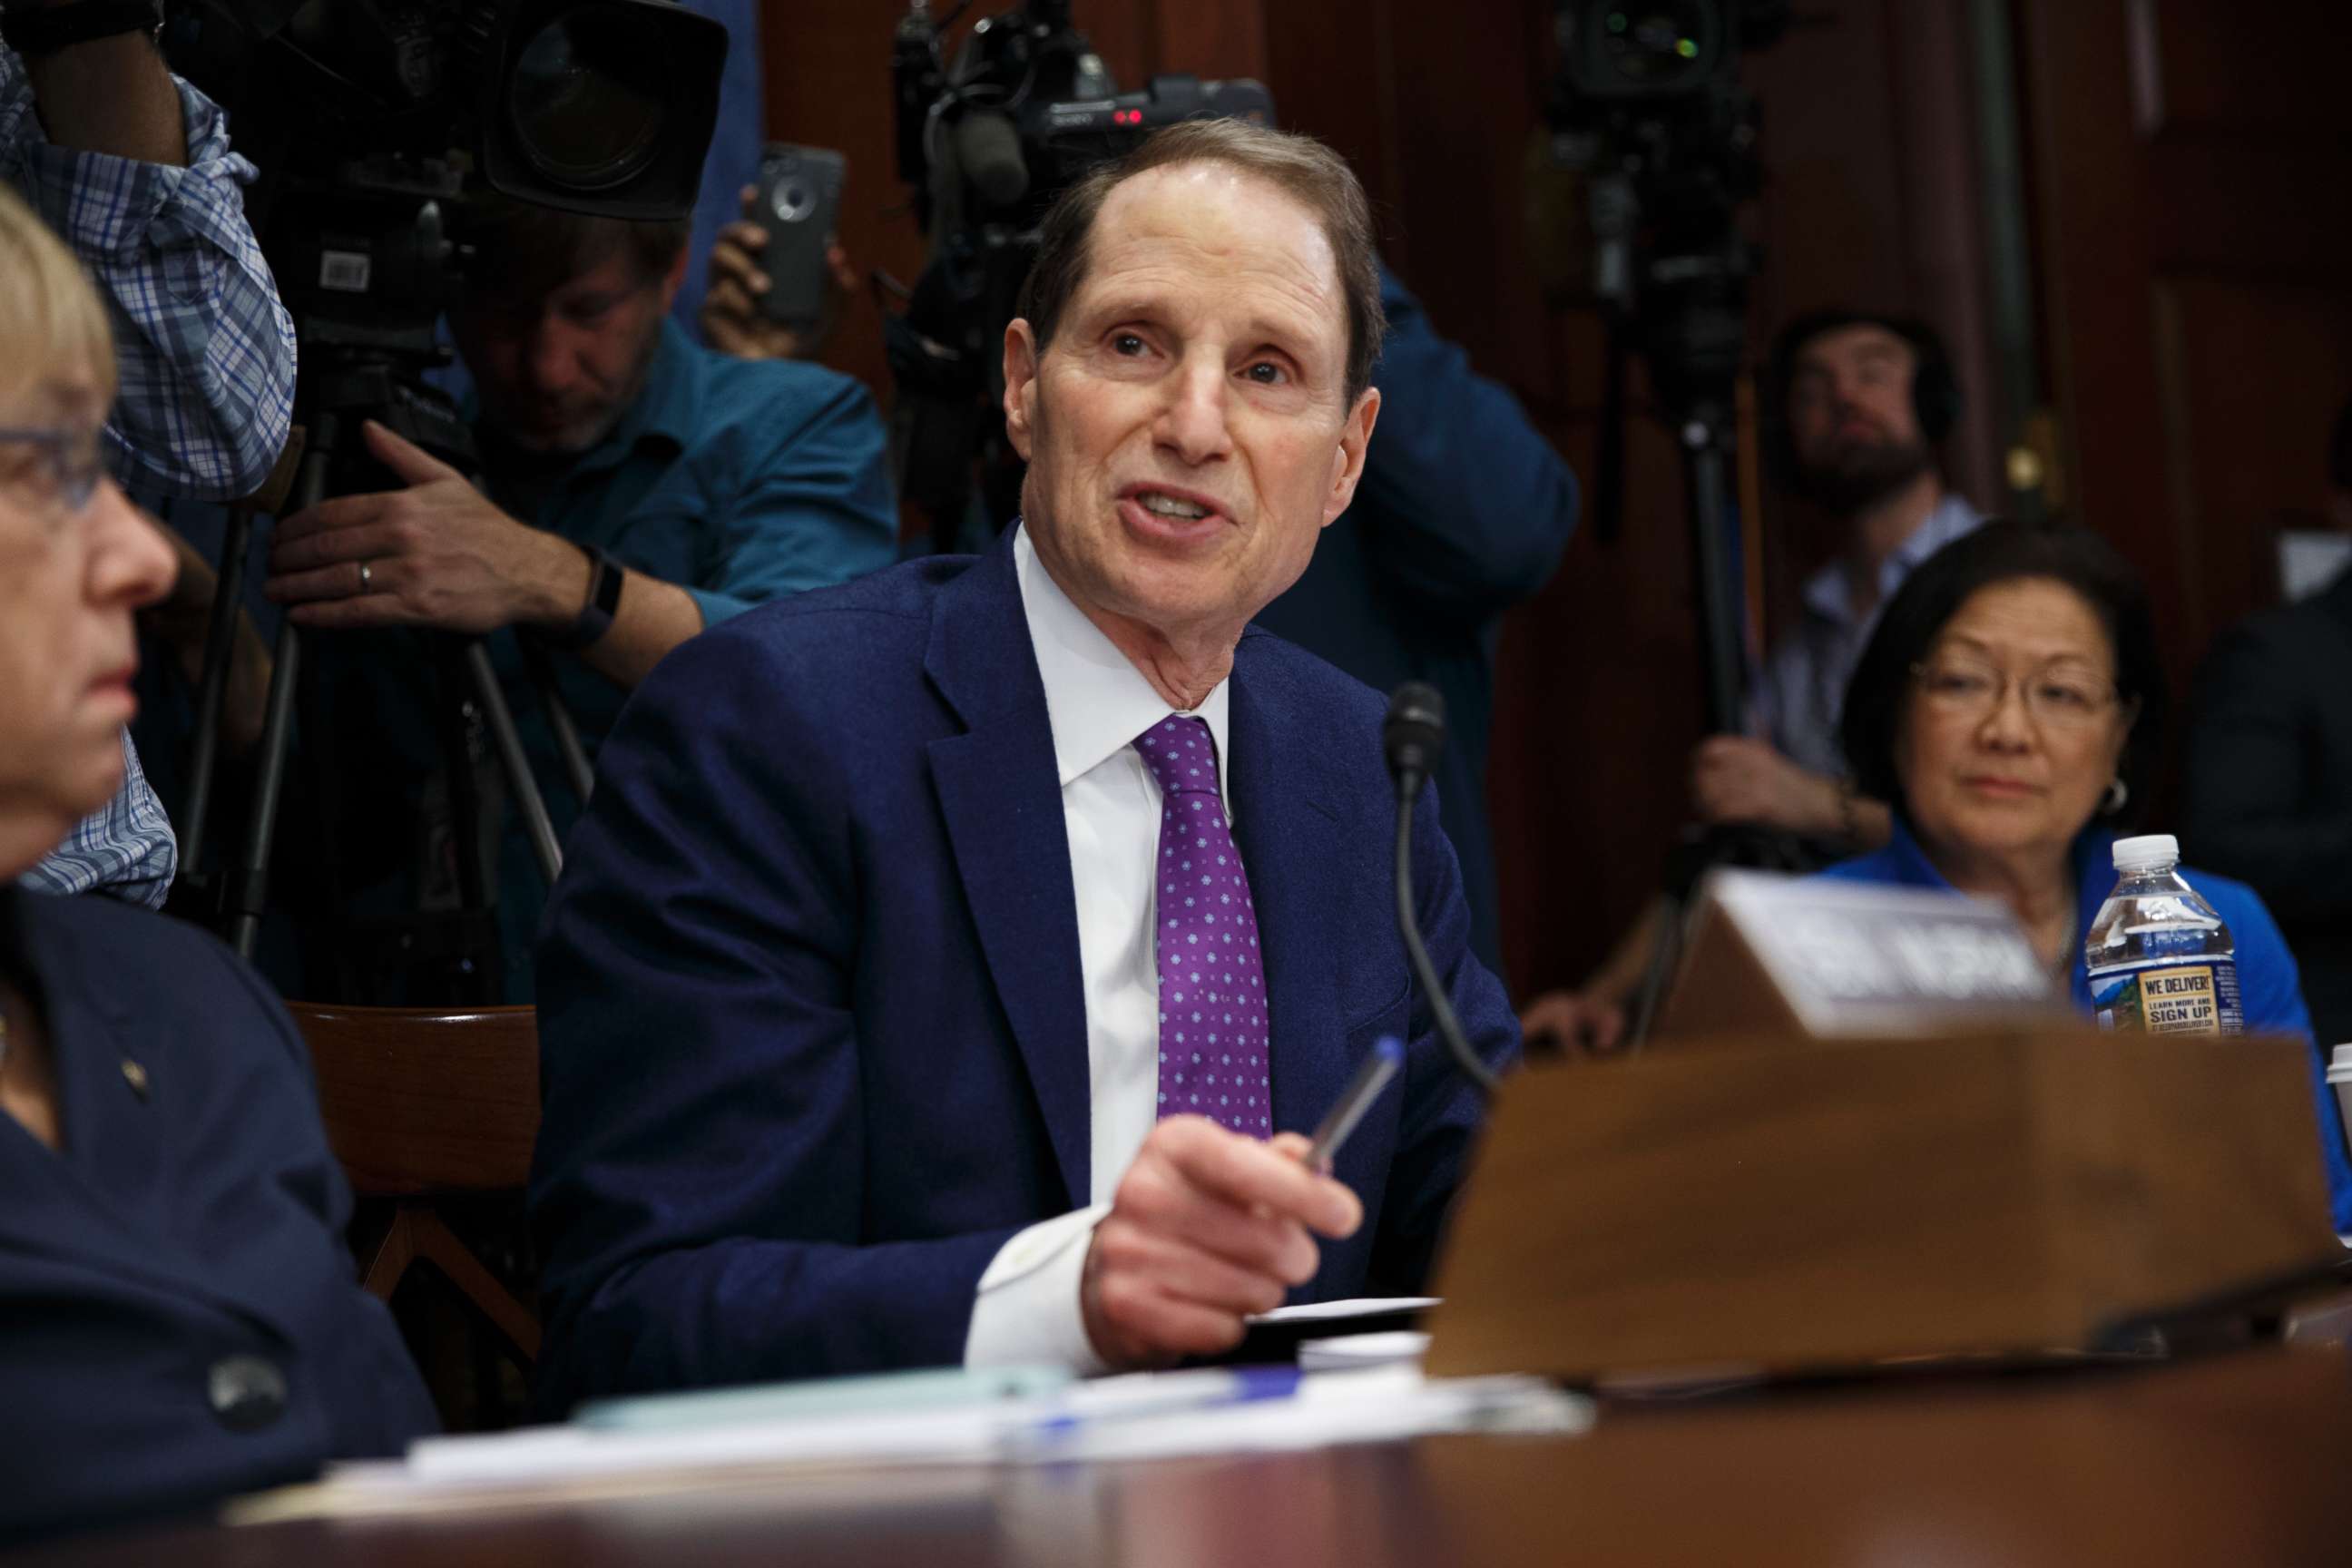 PHOTO: U.S. Senator Ron Wyden, Democrat of Oregon, speaks to hearing witnesses during a hearing held by Senate Democrats on protecting children from gun violence on Capitol Hill, March 7, 2018, in Washington.